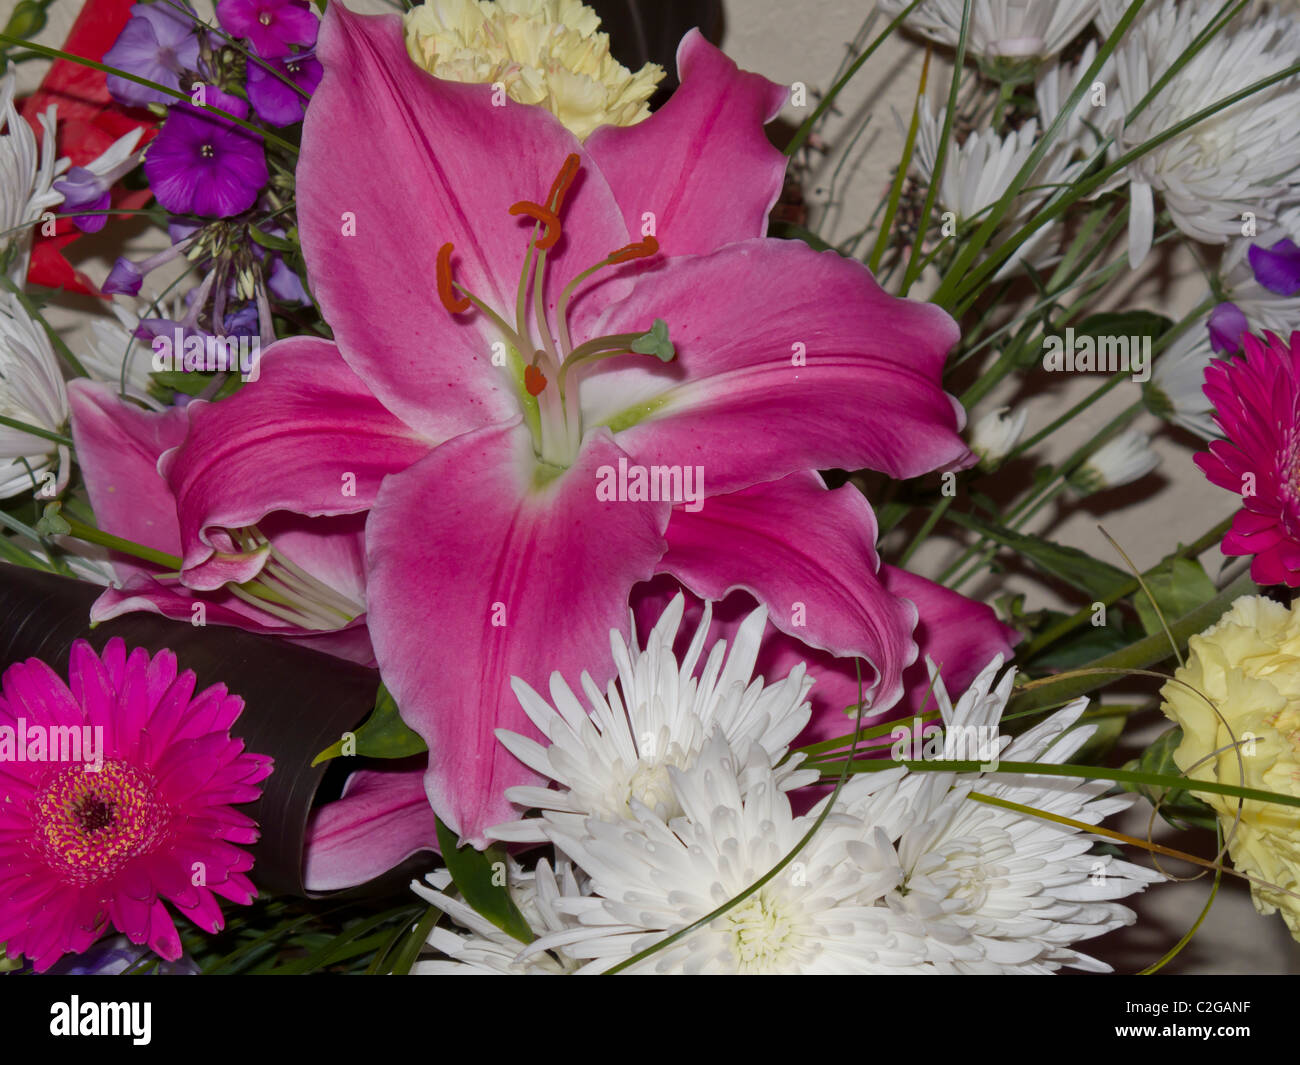 A display of flowers on Mothers day Stock Photo - Alamy